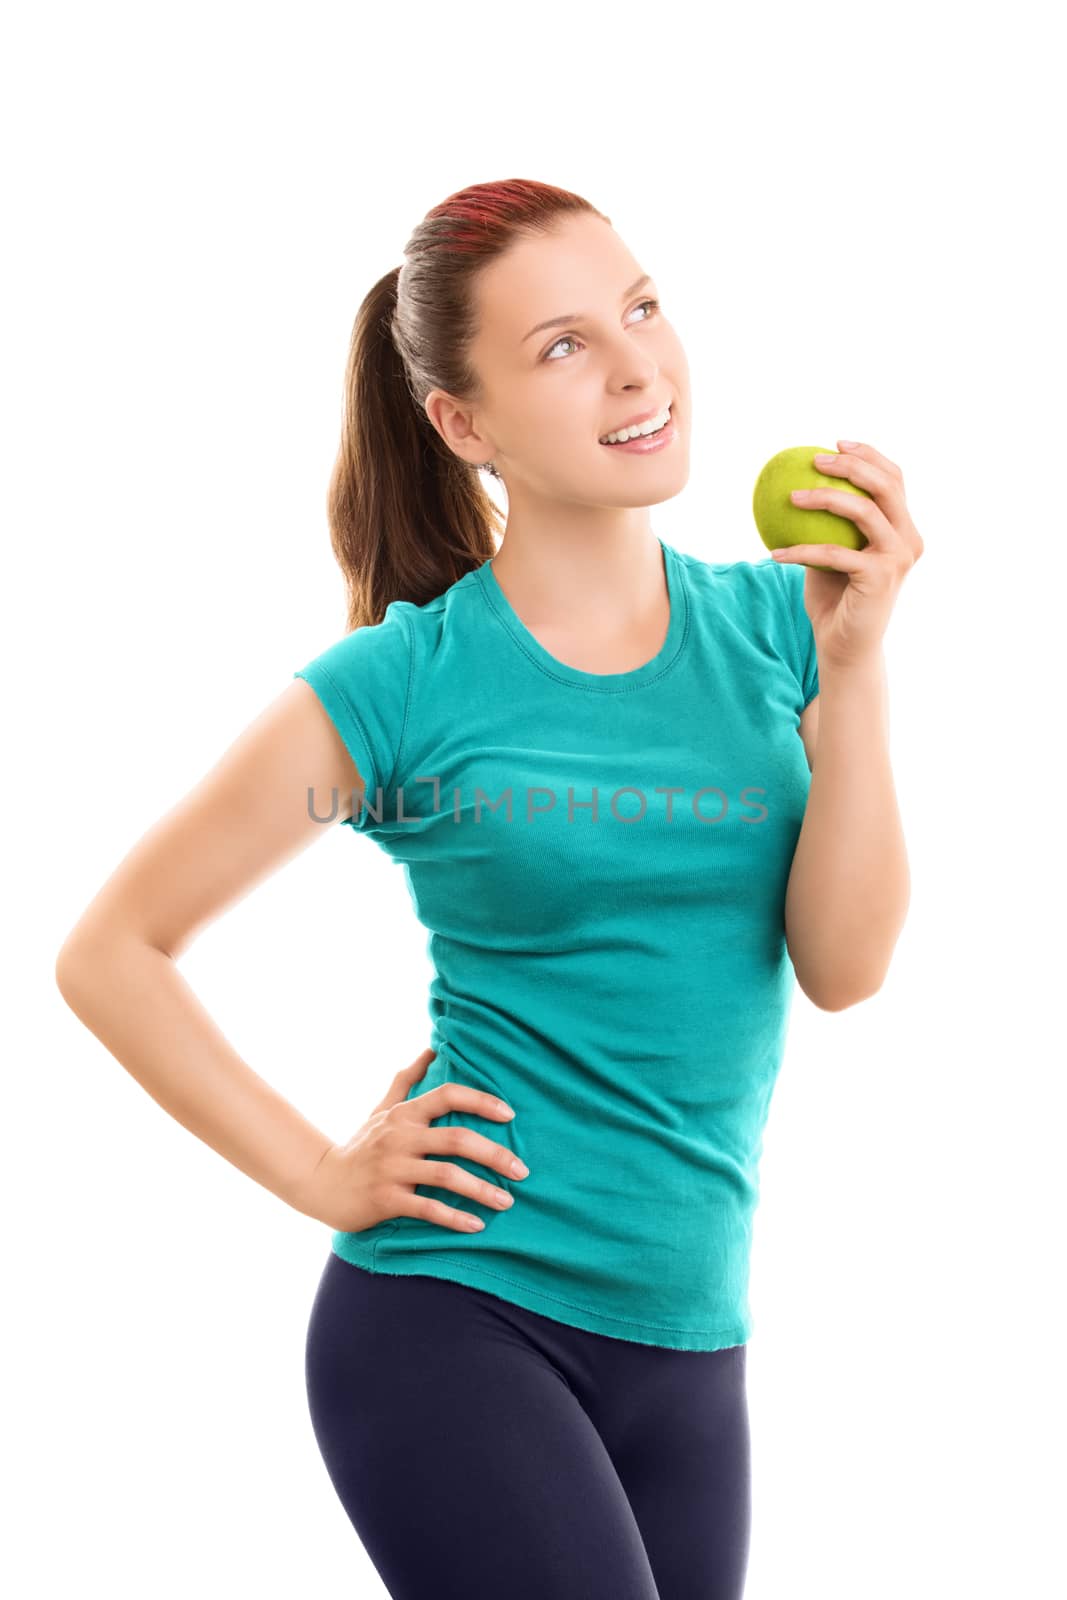 A portrait of a smiling beautiful young girl in fitness clothes holding an apple, isolated on white background.